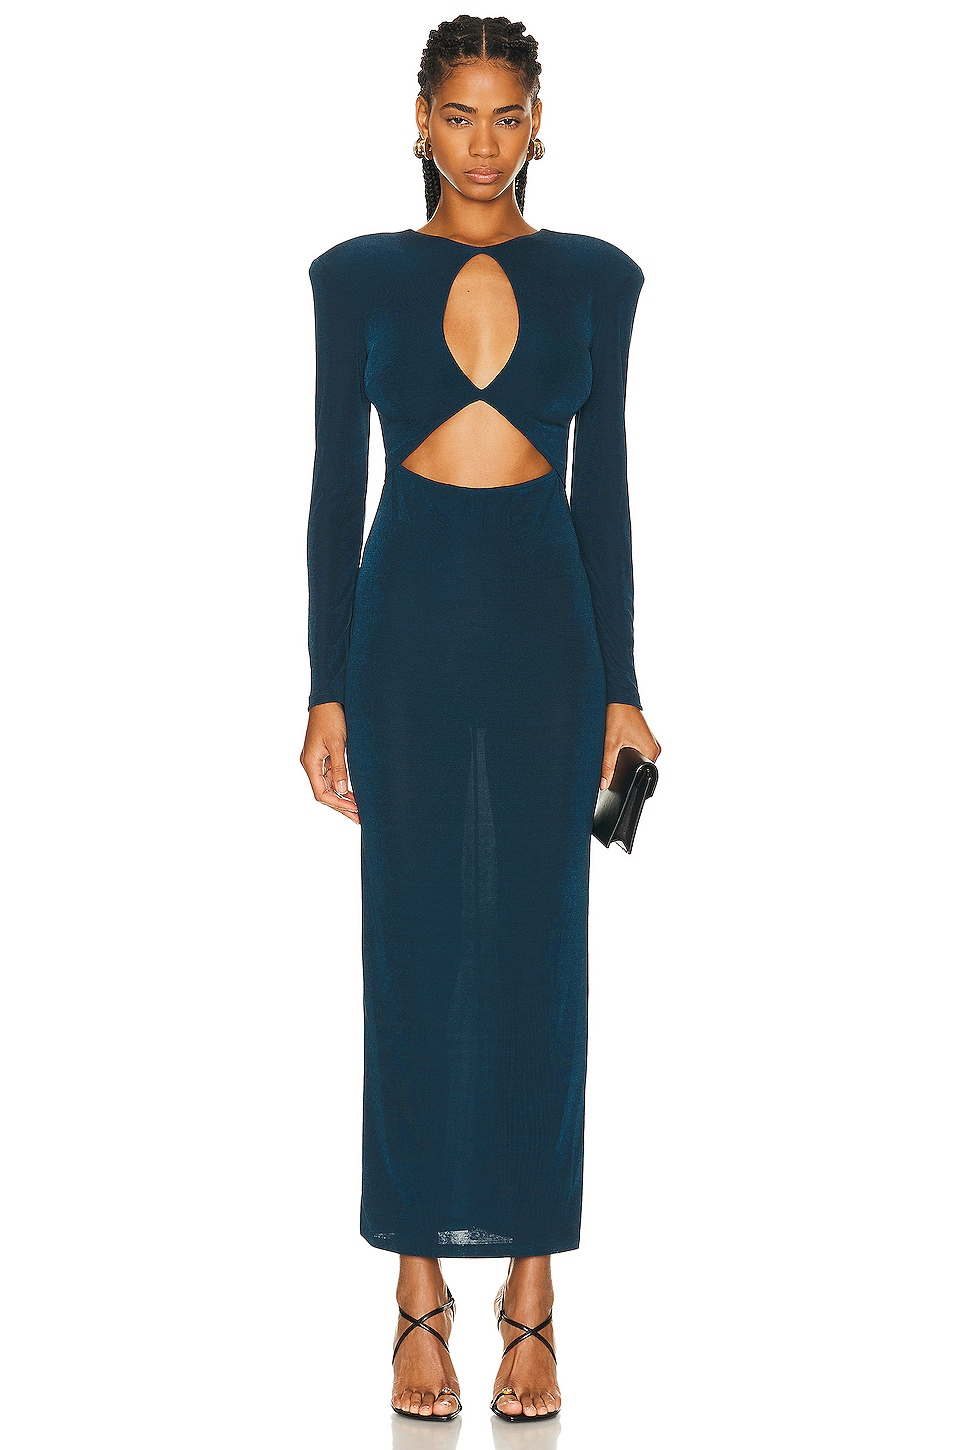 Image 1 of The New Arrivals by Ilkyaz Ozel Dalida Maxi Dress in Peacock Blue